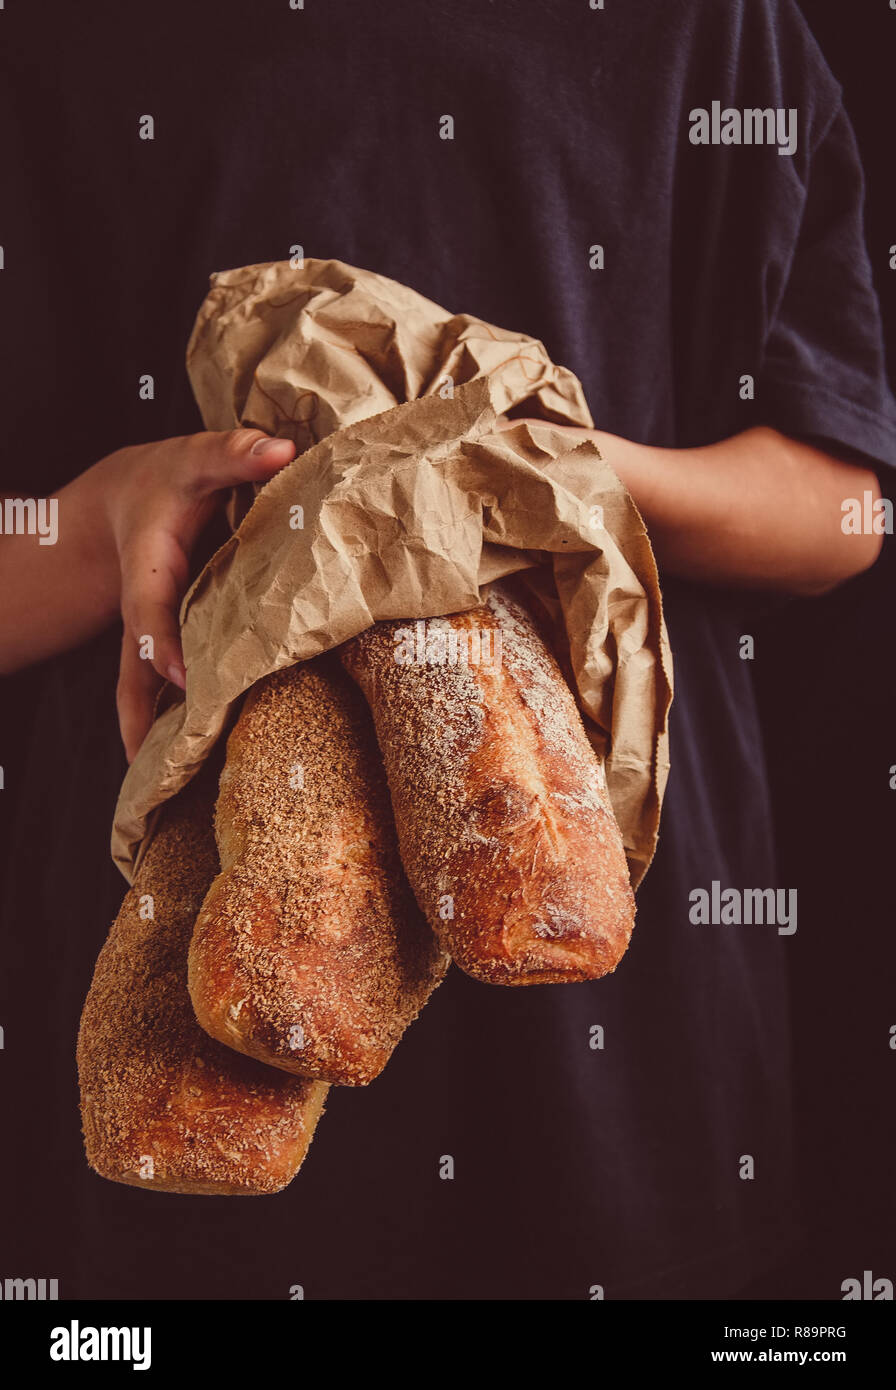 Freshly baked baguettes in the craft paper bag in the boy's hands. Dark food photo. Rustic style. Selective focus. Toned. Stock Photo